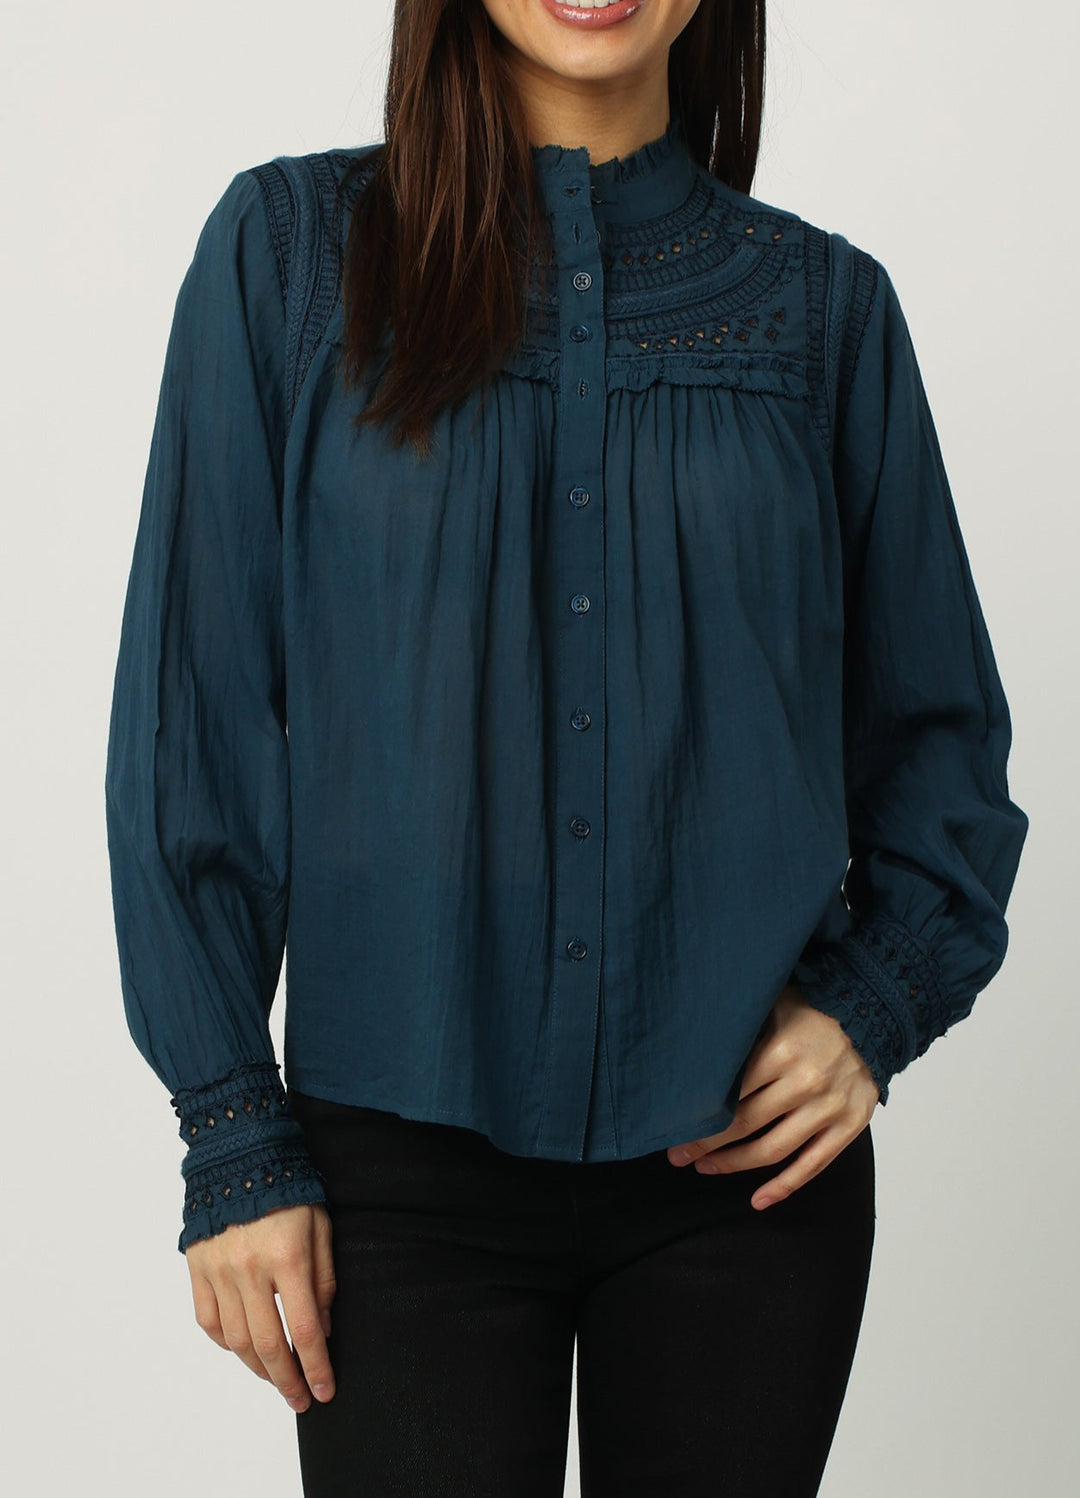 image of a female model wearing a KELLY EMBROIDERY DETAIL LONG SLEEVE TOP FRENCH NAVY SHIRTS